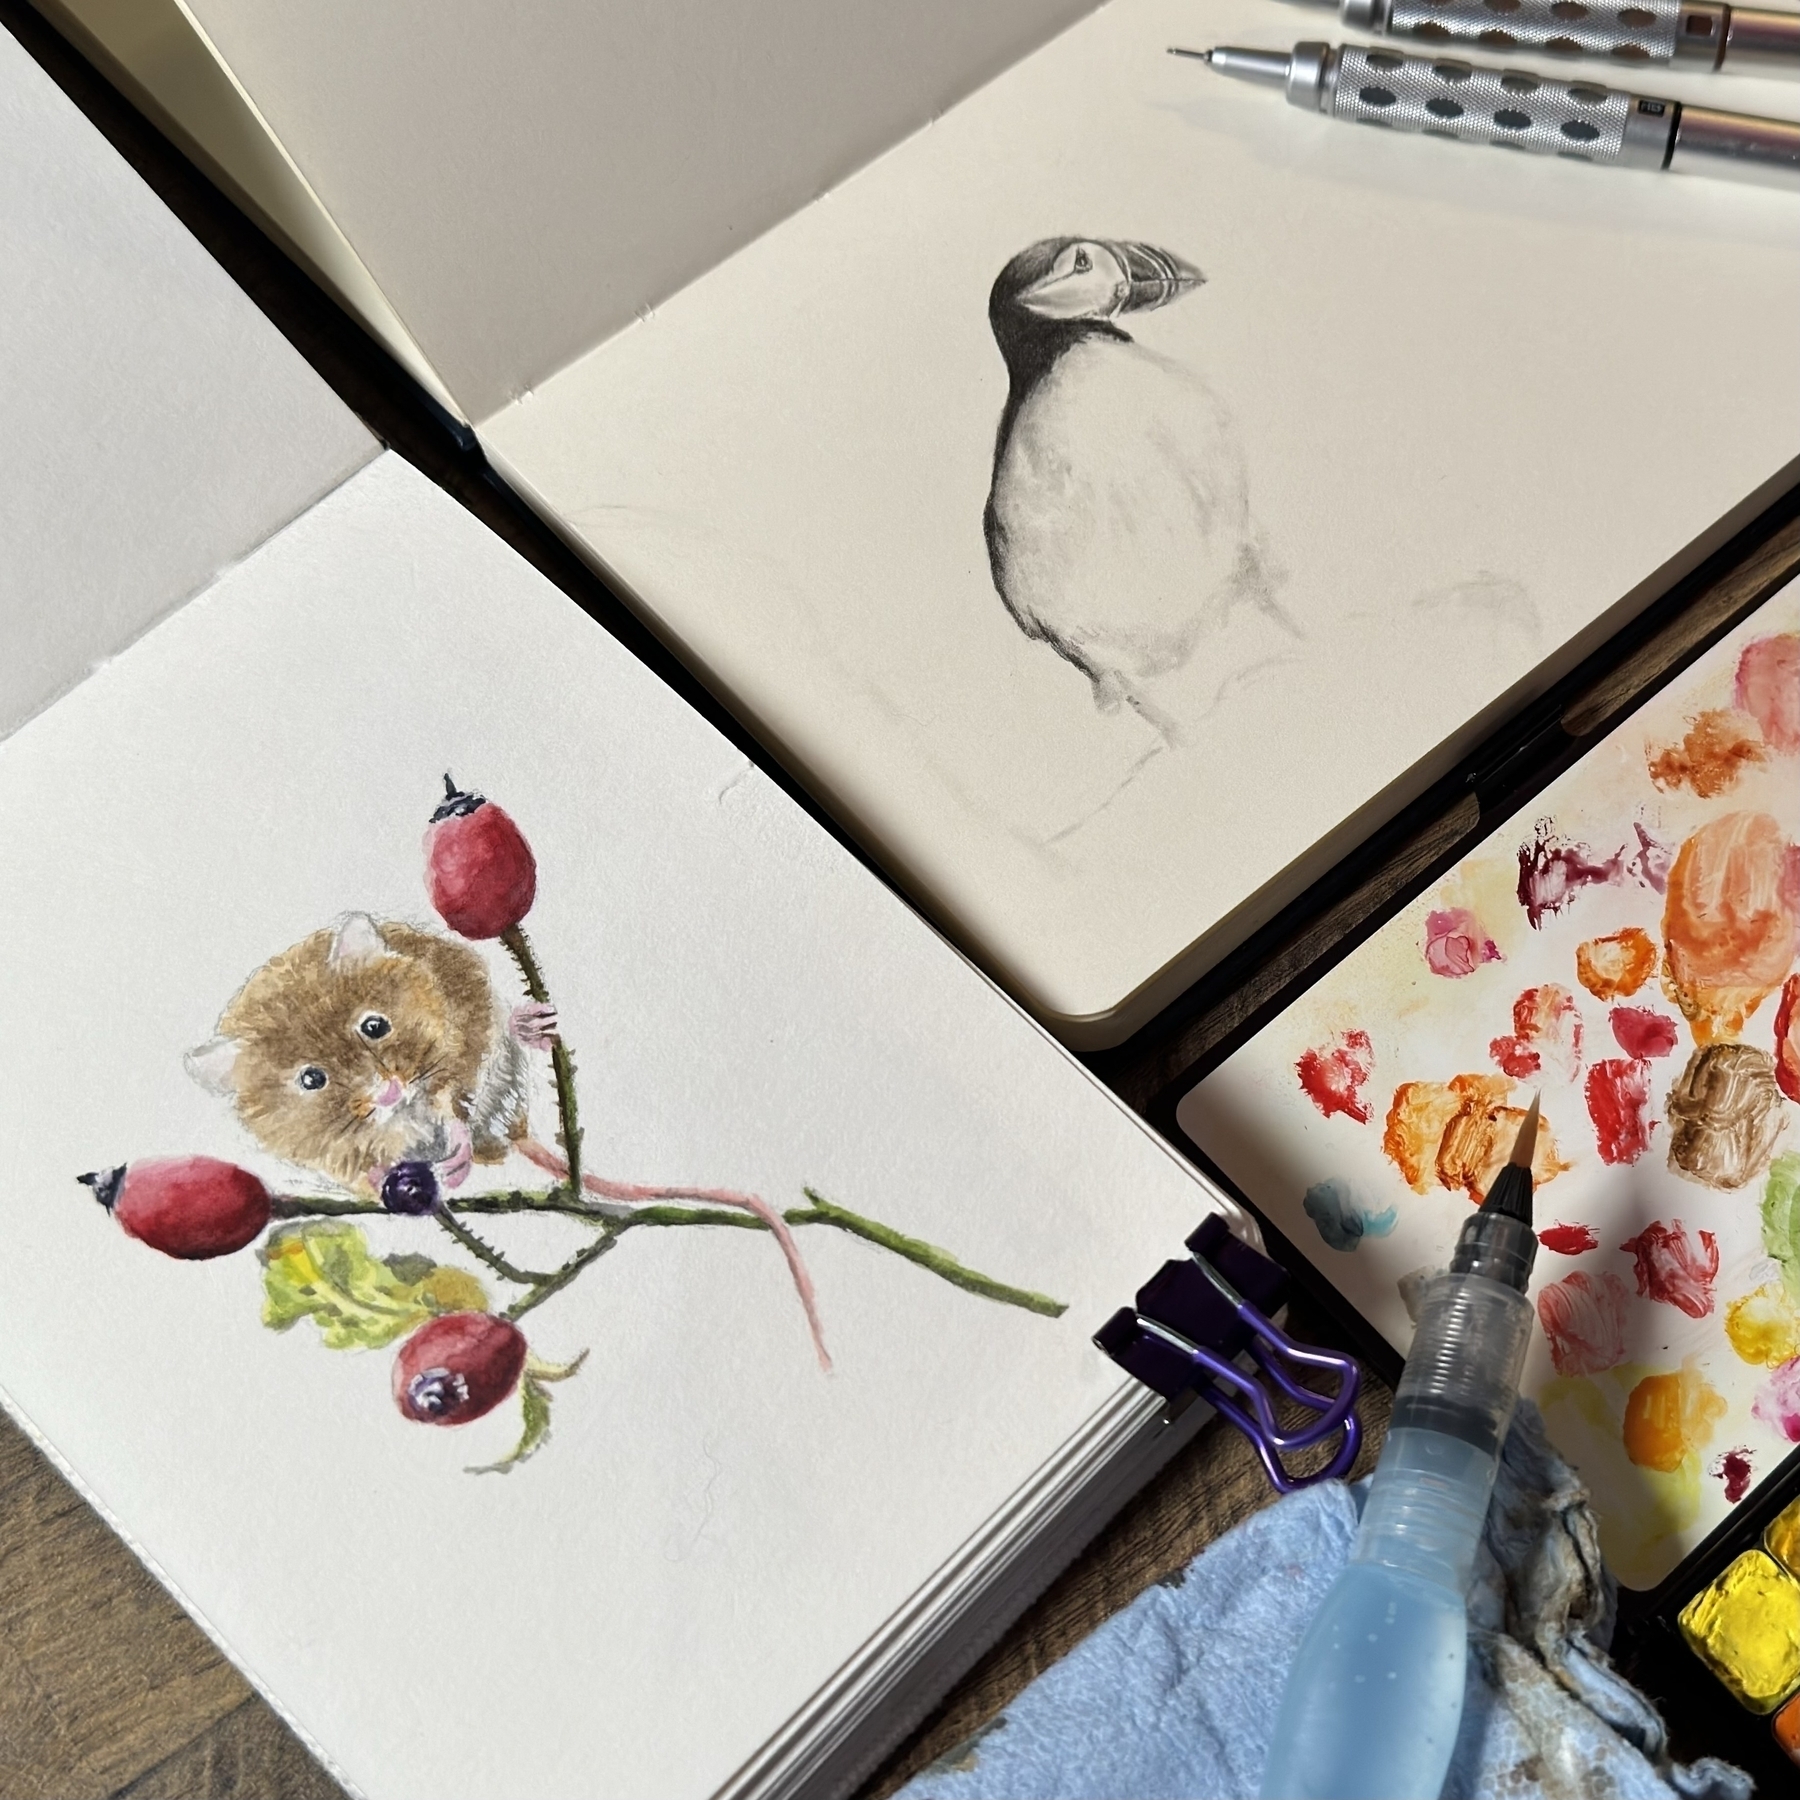 An artist’s workspace with two sketchbooks, one with a pencil sketch of a puffin and another with a watercolor painting of a mouse on rose hips; a palette of watercolors with mixed hues, a water brush, and painting brushes on a wooden surface.